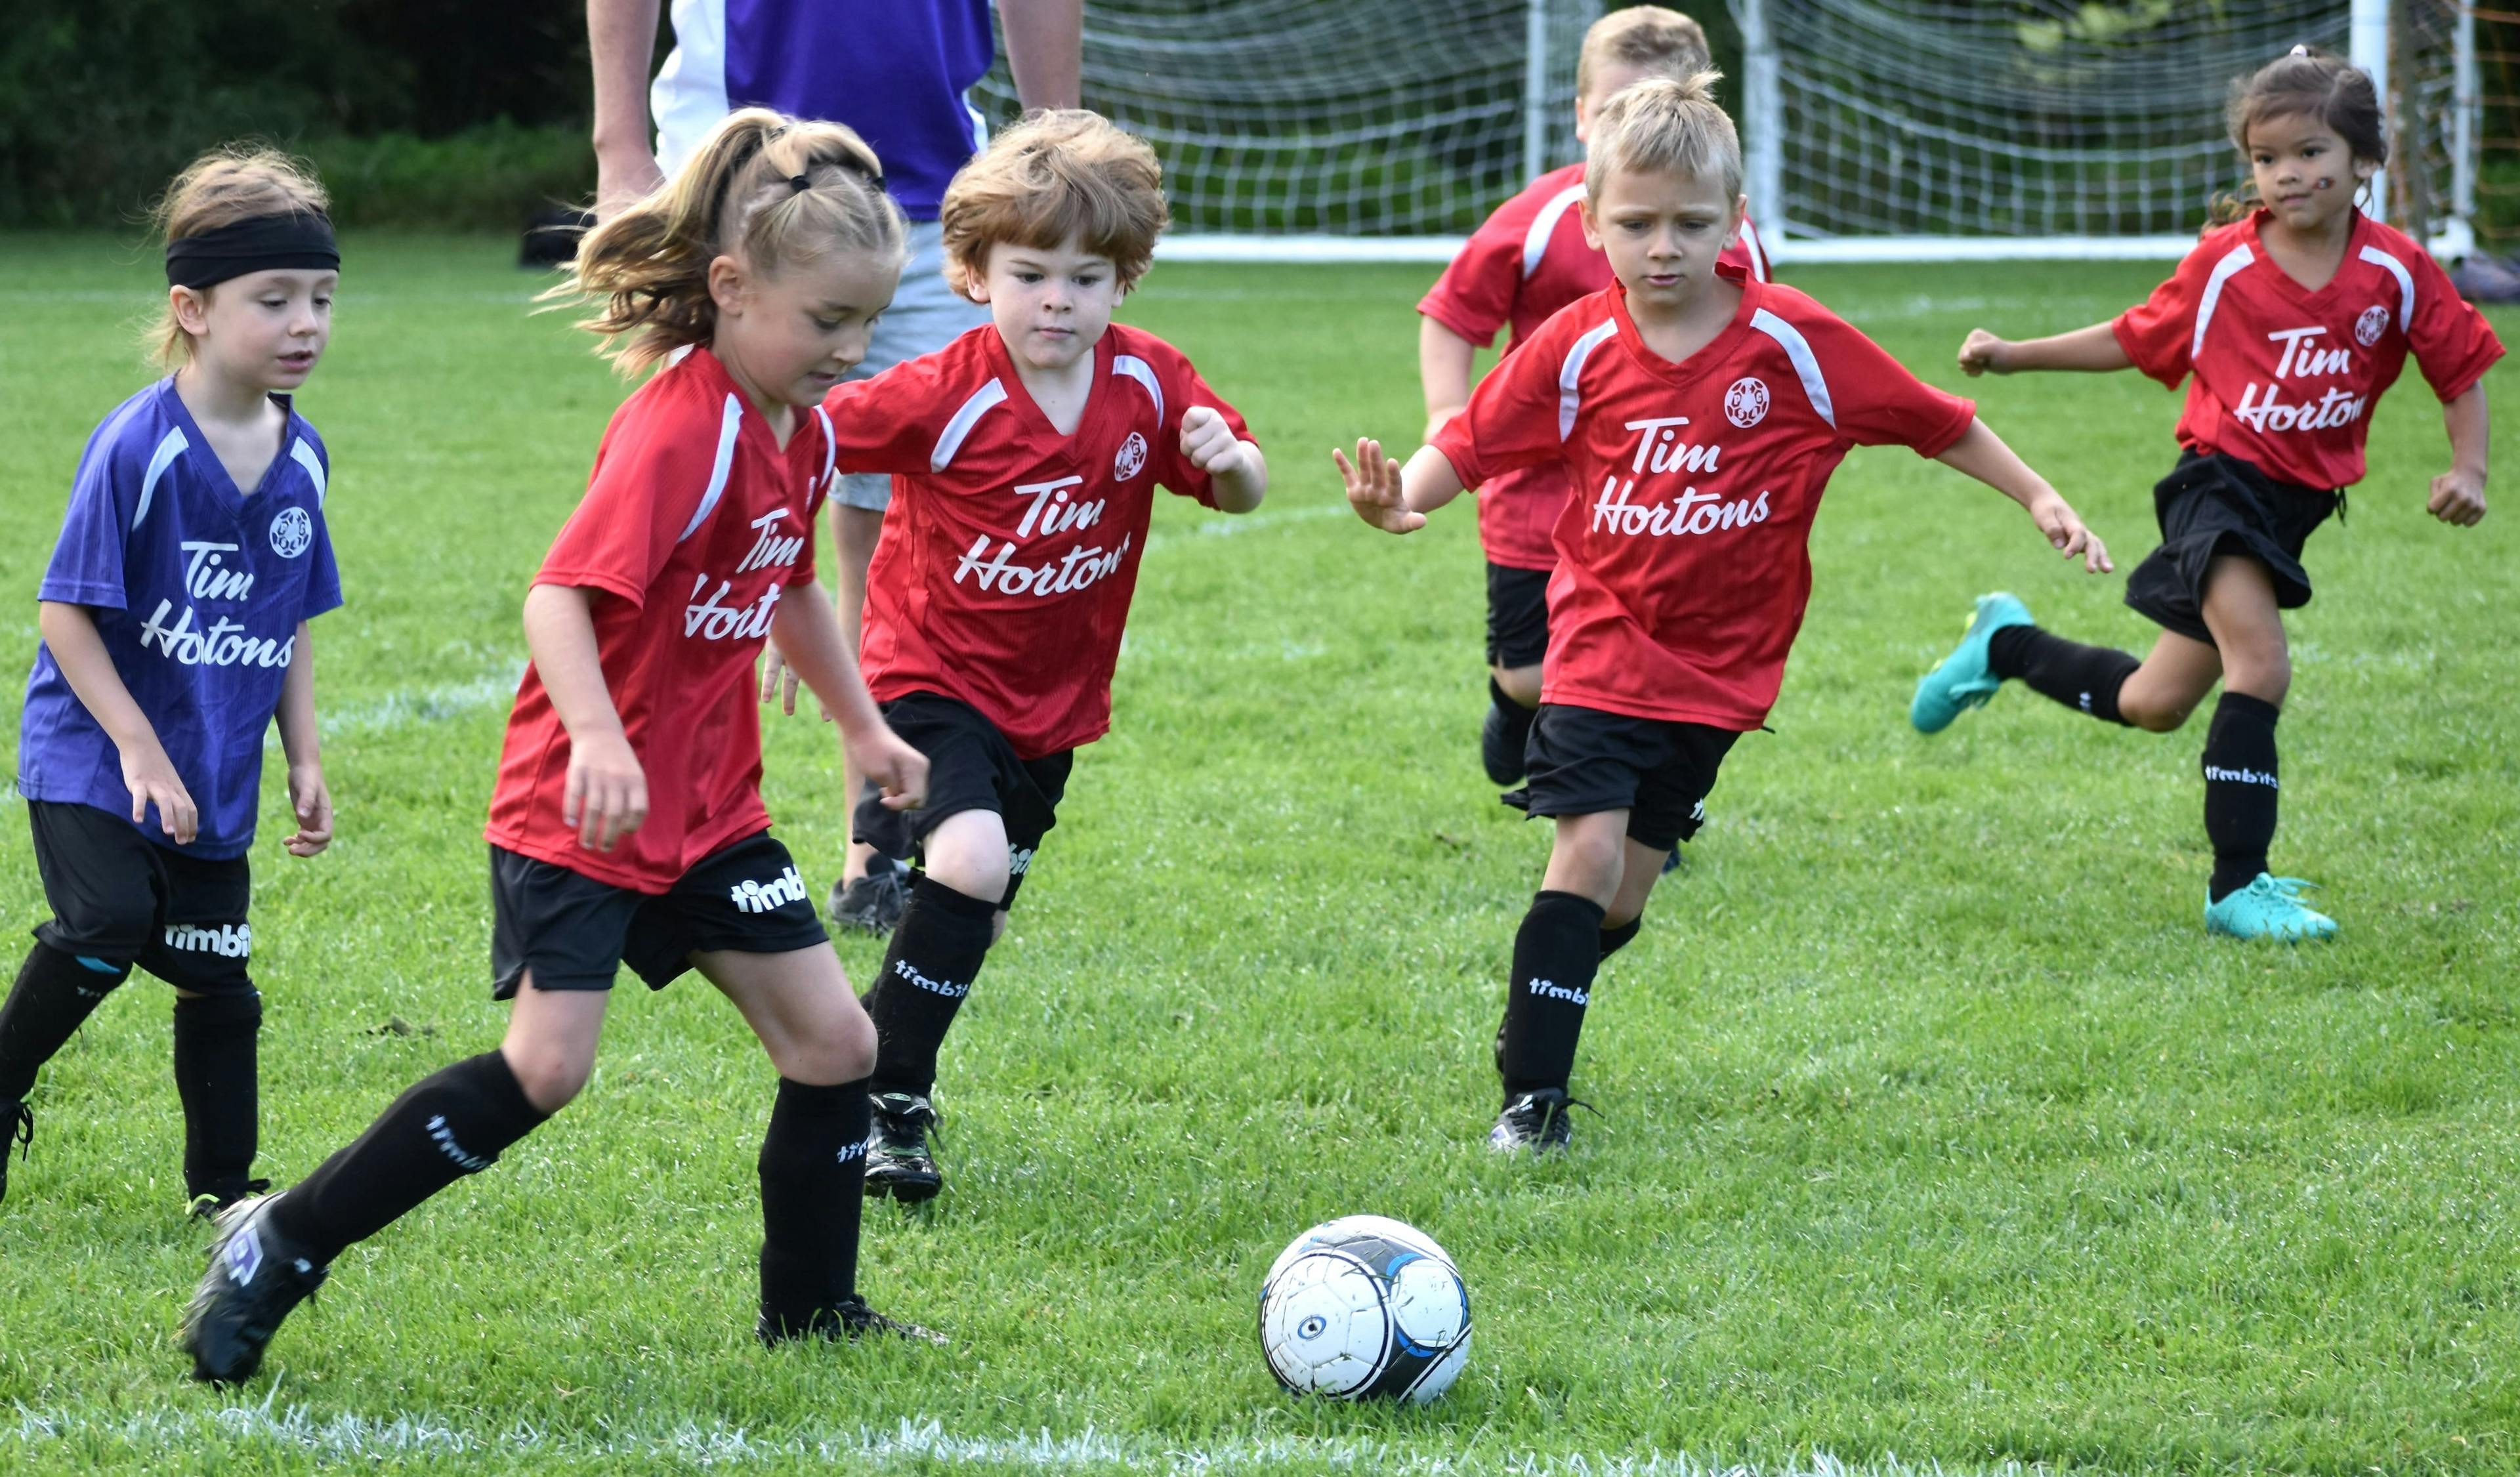 <p>The Parks and Recreation Master Plan indicates Prince Edward County is well served by the current compliment of soccer fields and baseball diamonds although more data is needed to gauge their utilization rates. (Jason Parks/Gazette Staff)</p>
